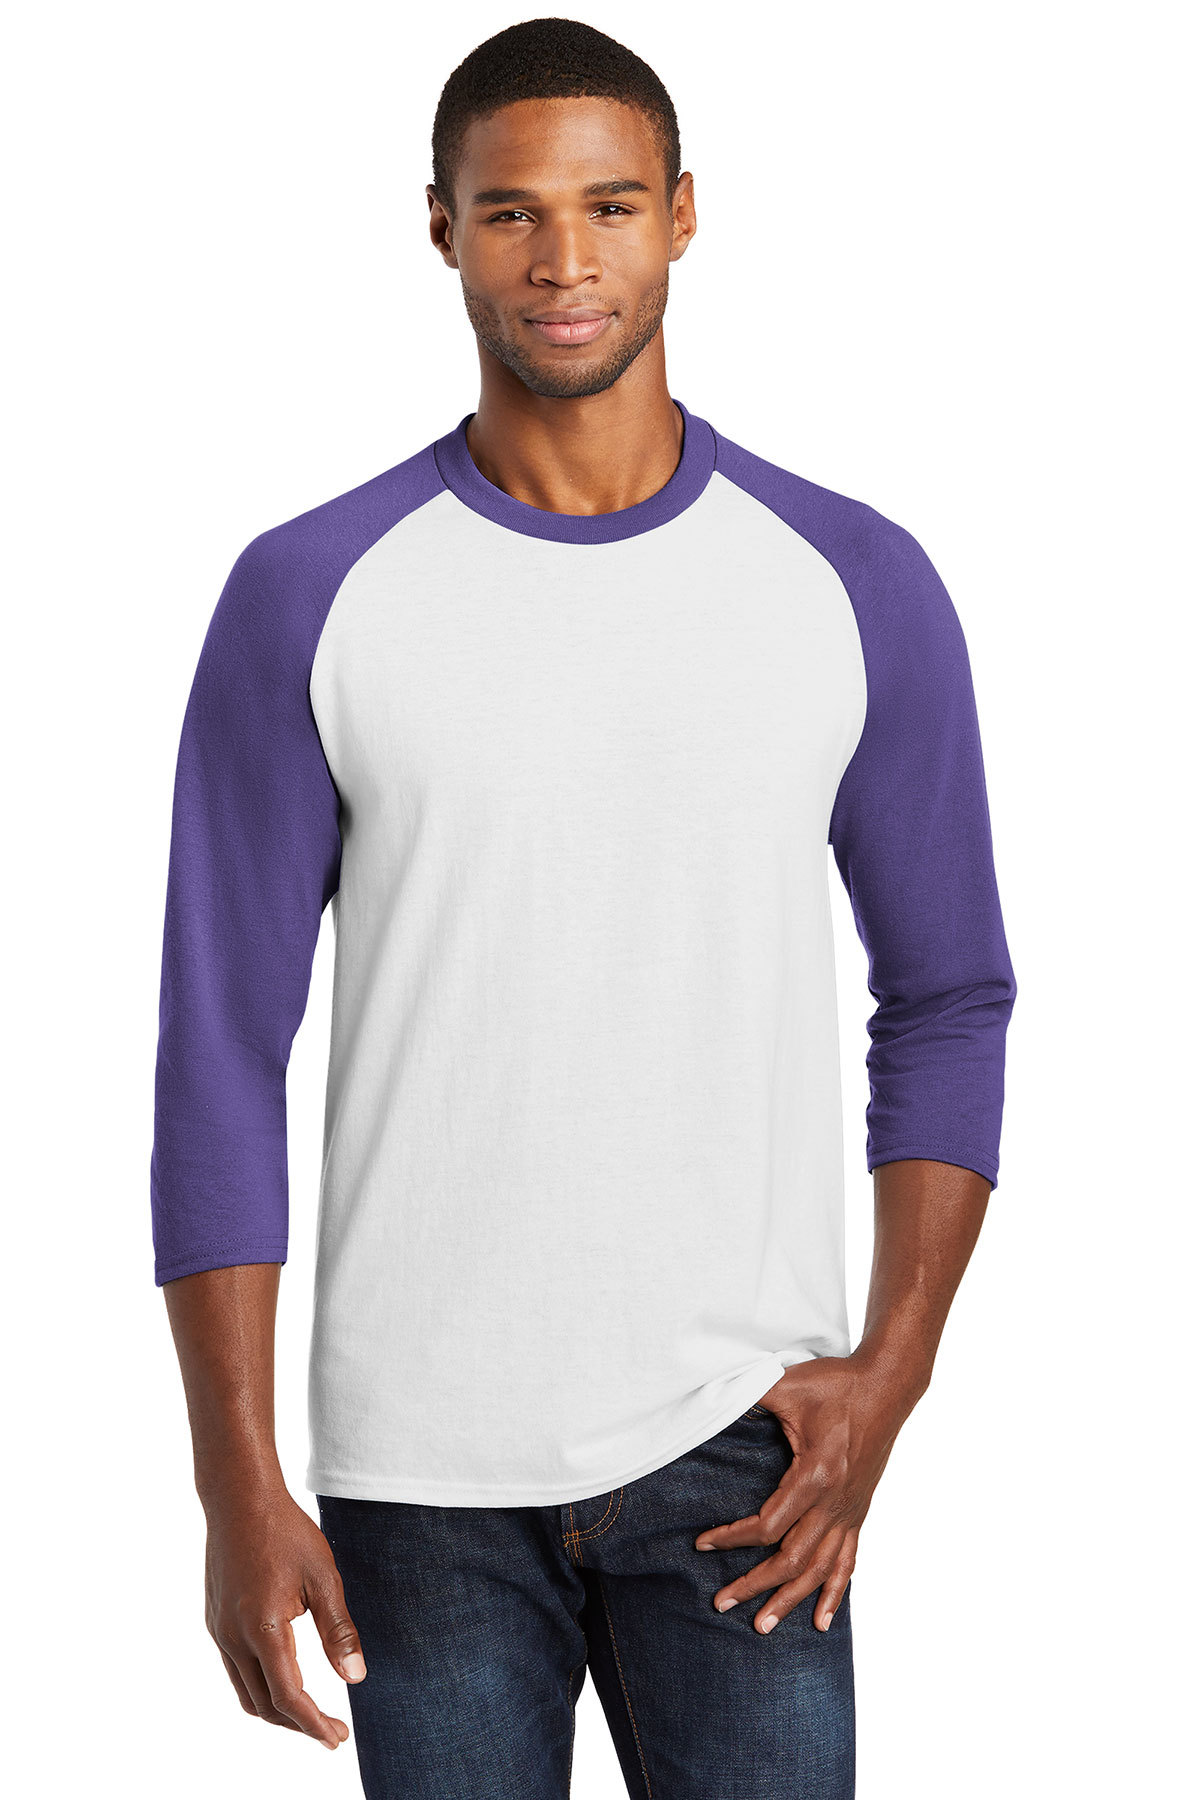 [Pack of 4] Raglan 2 colors button Full sleeves T shirts for men and women  Random Colors